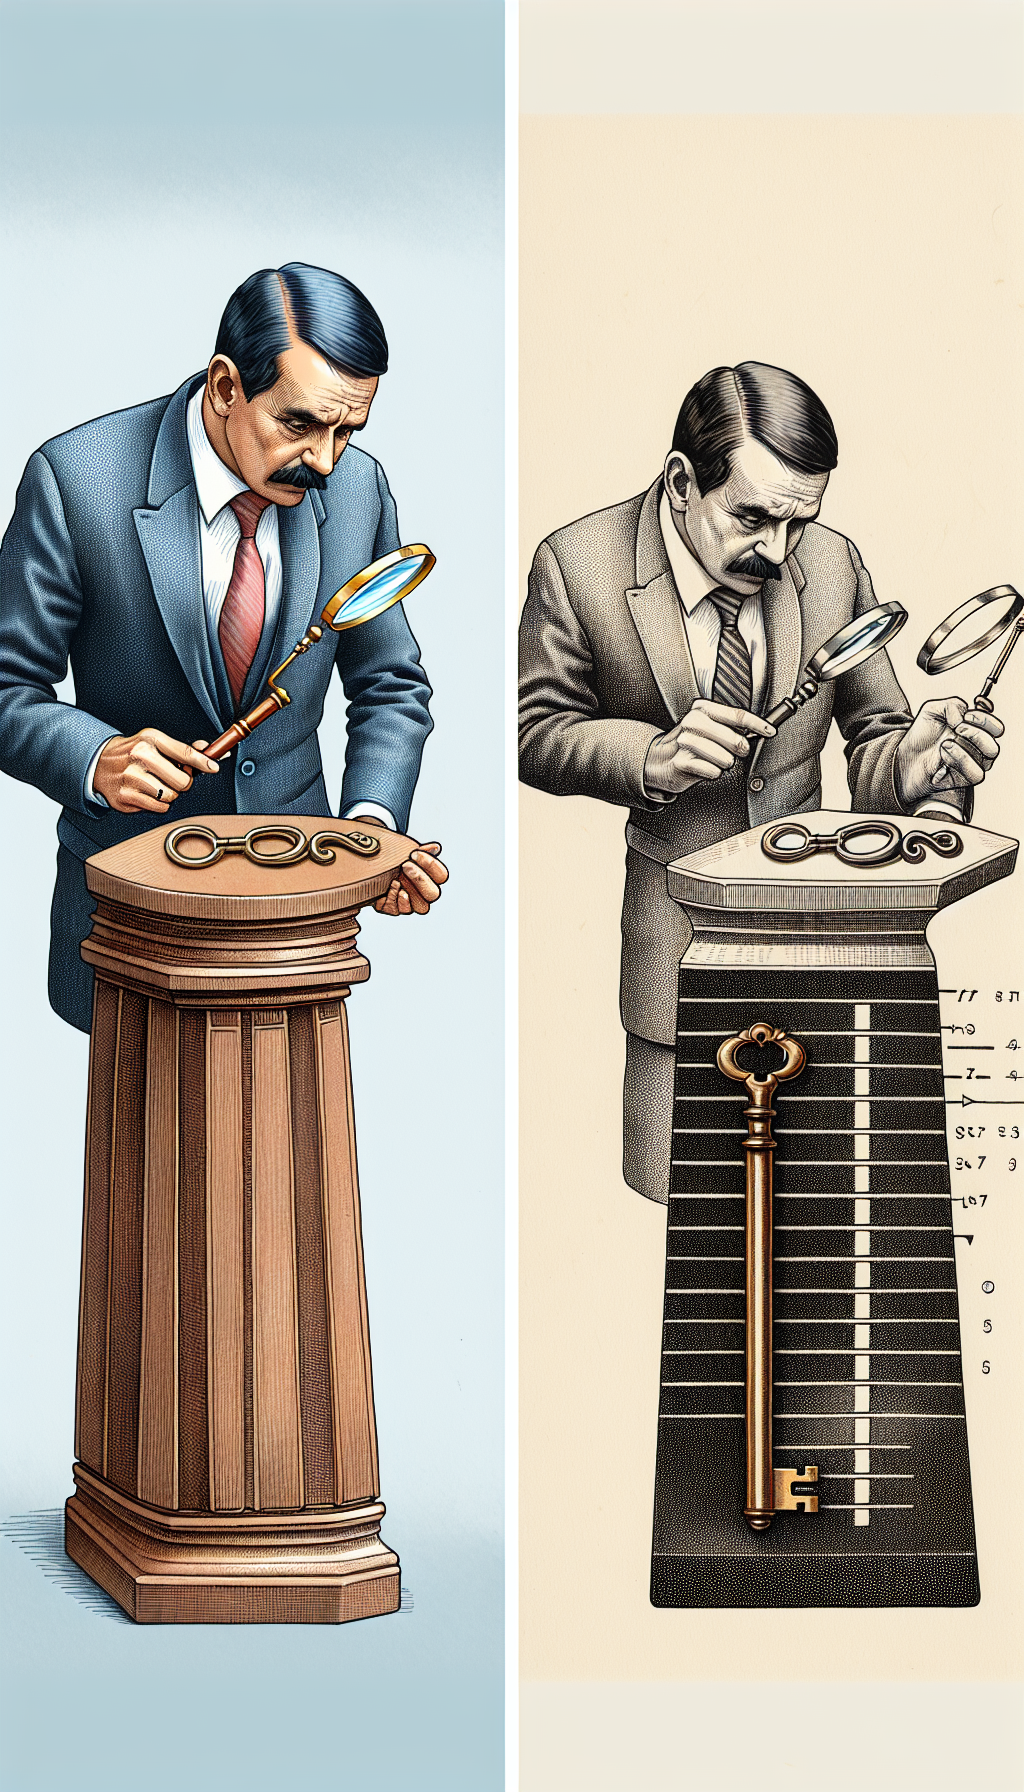 An illustration depicts an appraiser holding a magnifying glass up to a vintage key, resting on a pedestal with incremental lines that resemble a condition meter, each point highlighting different factors like 'wear', 'authenticity', and 'rarity'. The key morphs into pristine and tarnished versions of itself along the meter, visualizing how condition affects its value. The varying styles—from watercolor to line art—embrace the diversity of antiques.